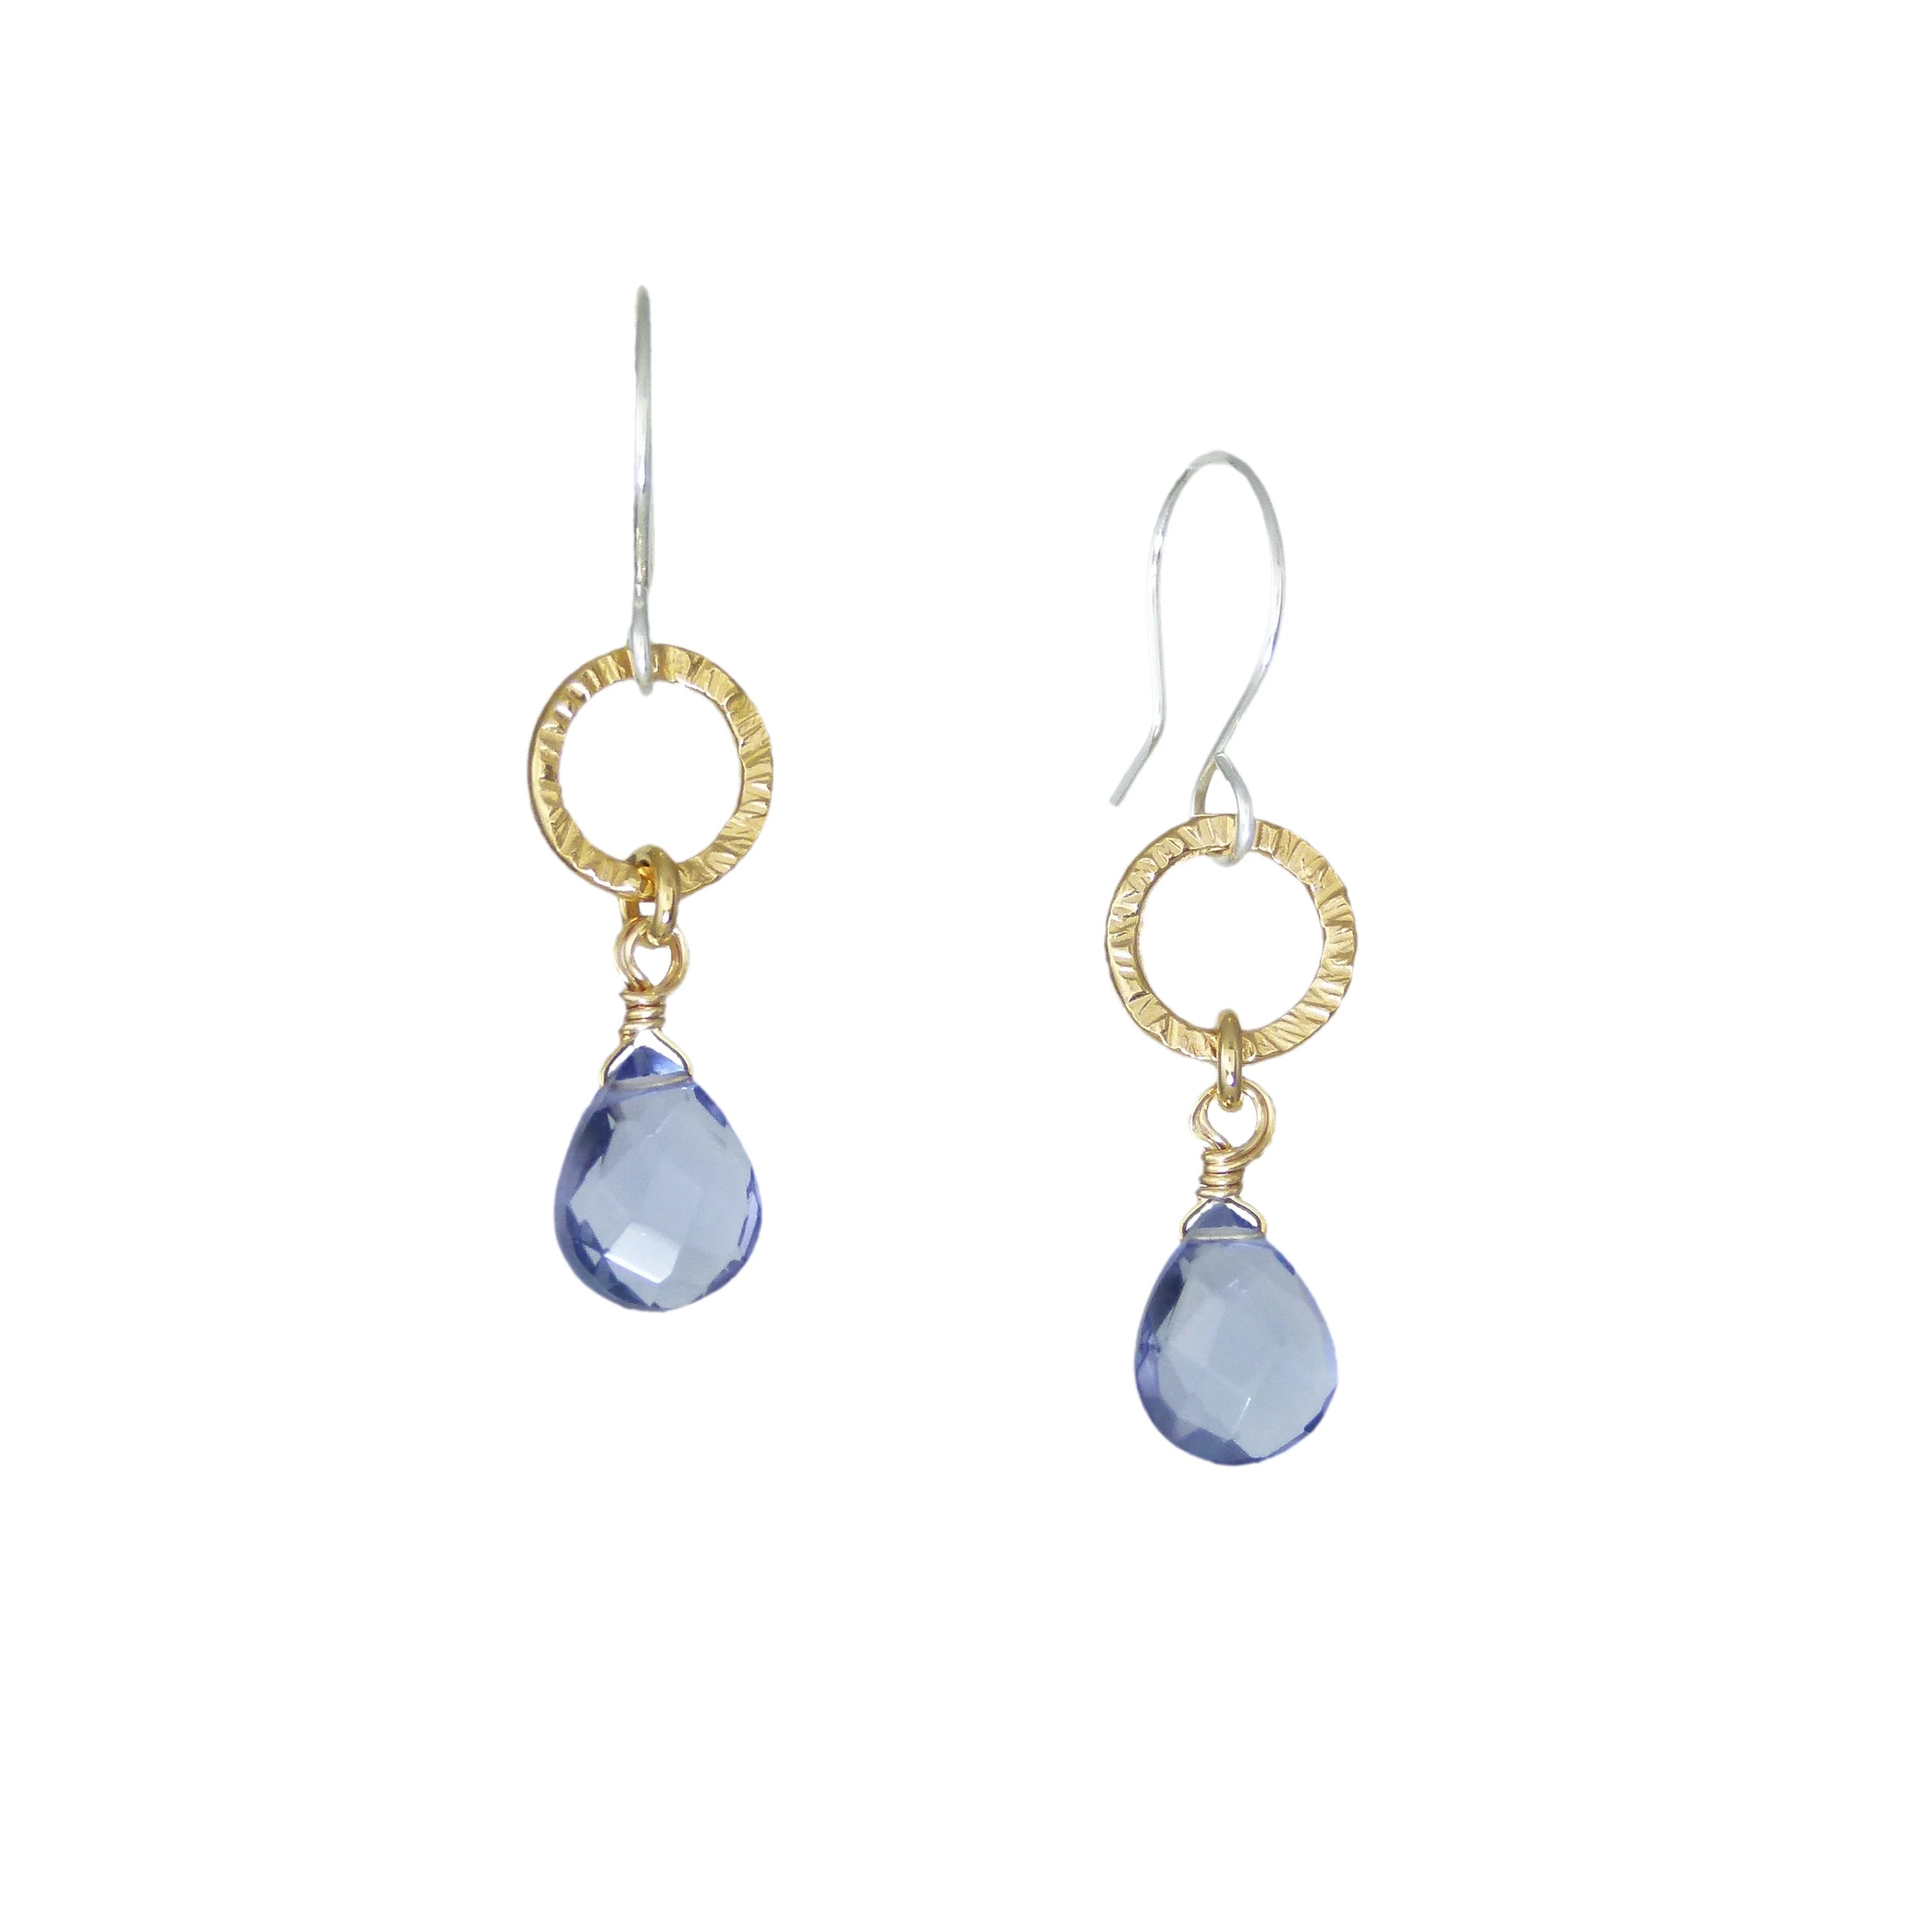 Tiny Hammered Earrings - Iolite